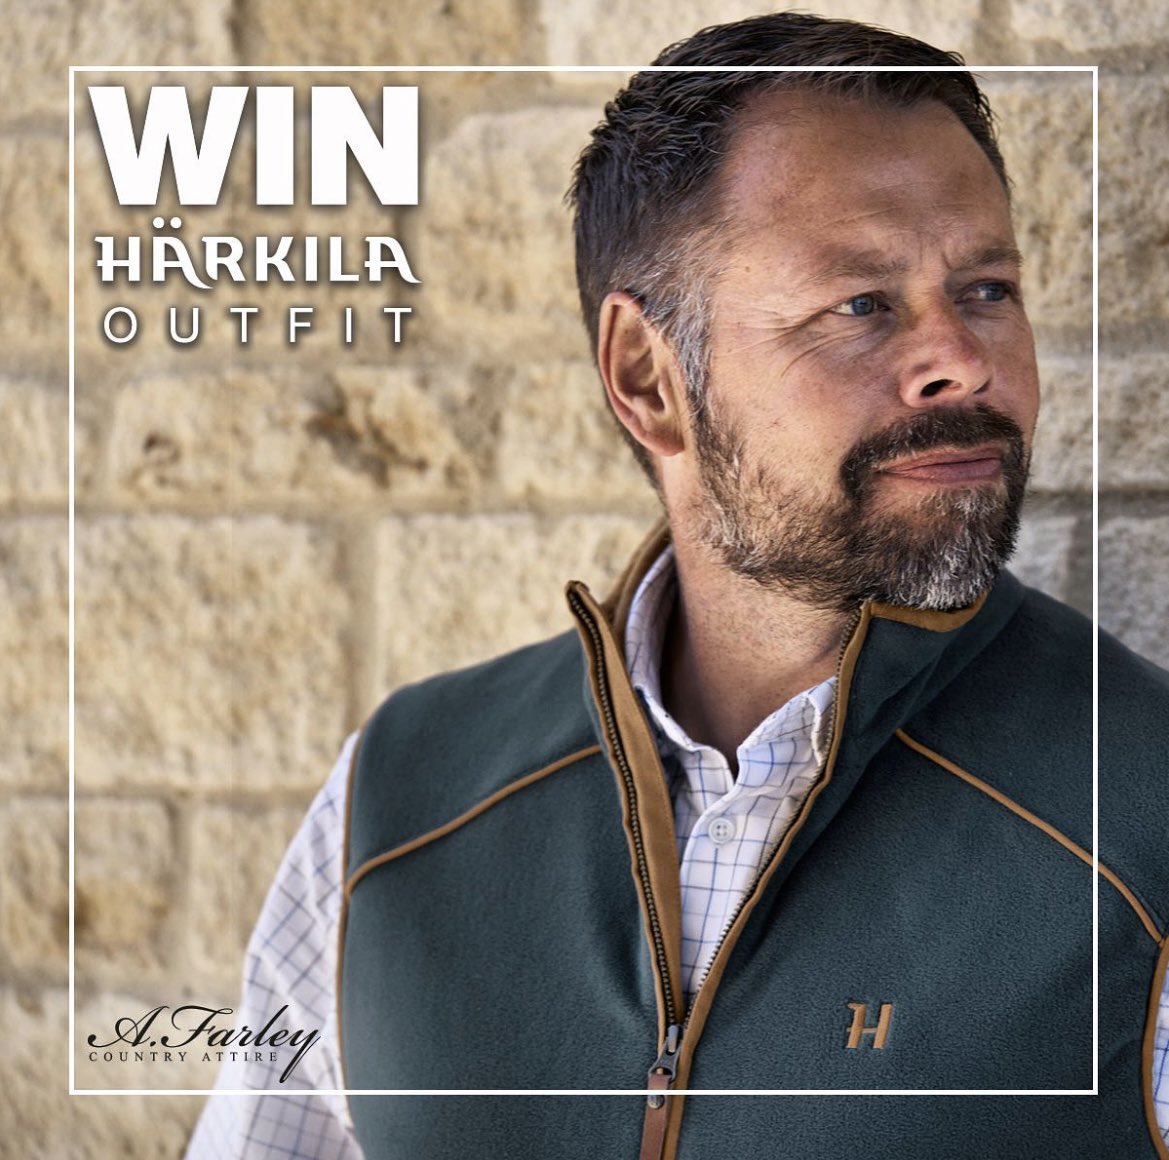 DONT FORGET TO ENTER OUR HARKILA GIVEAWAY ⭐️ Giveaway includes; -Harkila Sandhem Fleece -Harkila Retrieve Shirt -Harkila Asmund Trousers -Harkila Pro Hunter 2.0 Socks To enter; 1) Follow our page & like this post 2) Re-share this post ✨ Ends Friday 29th Sept #Giveaway